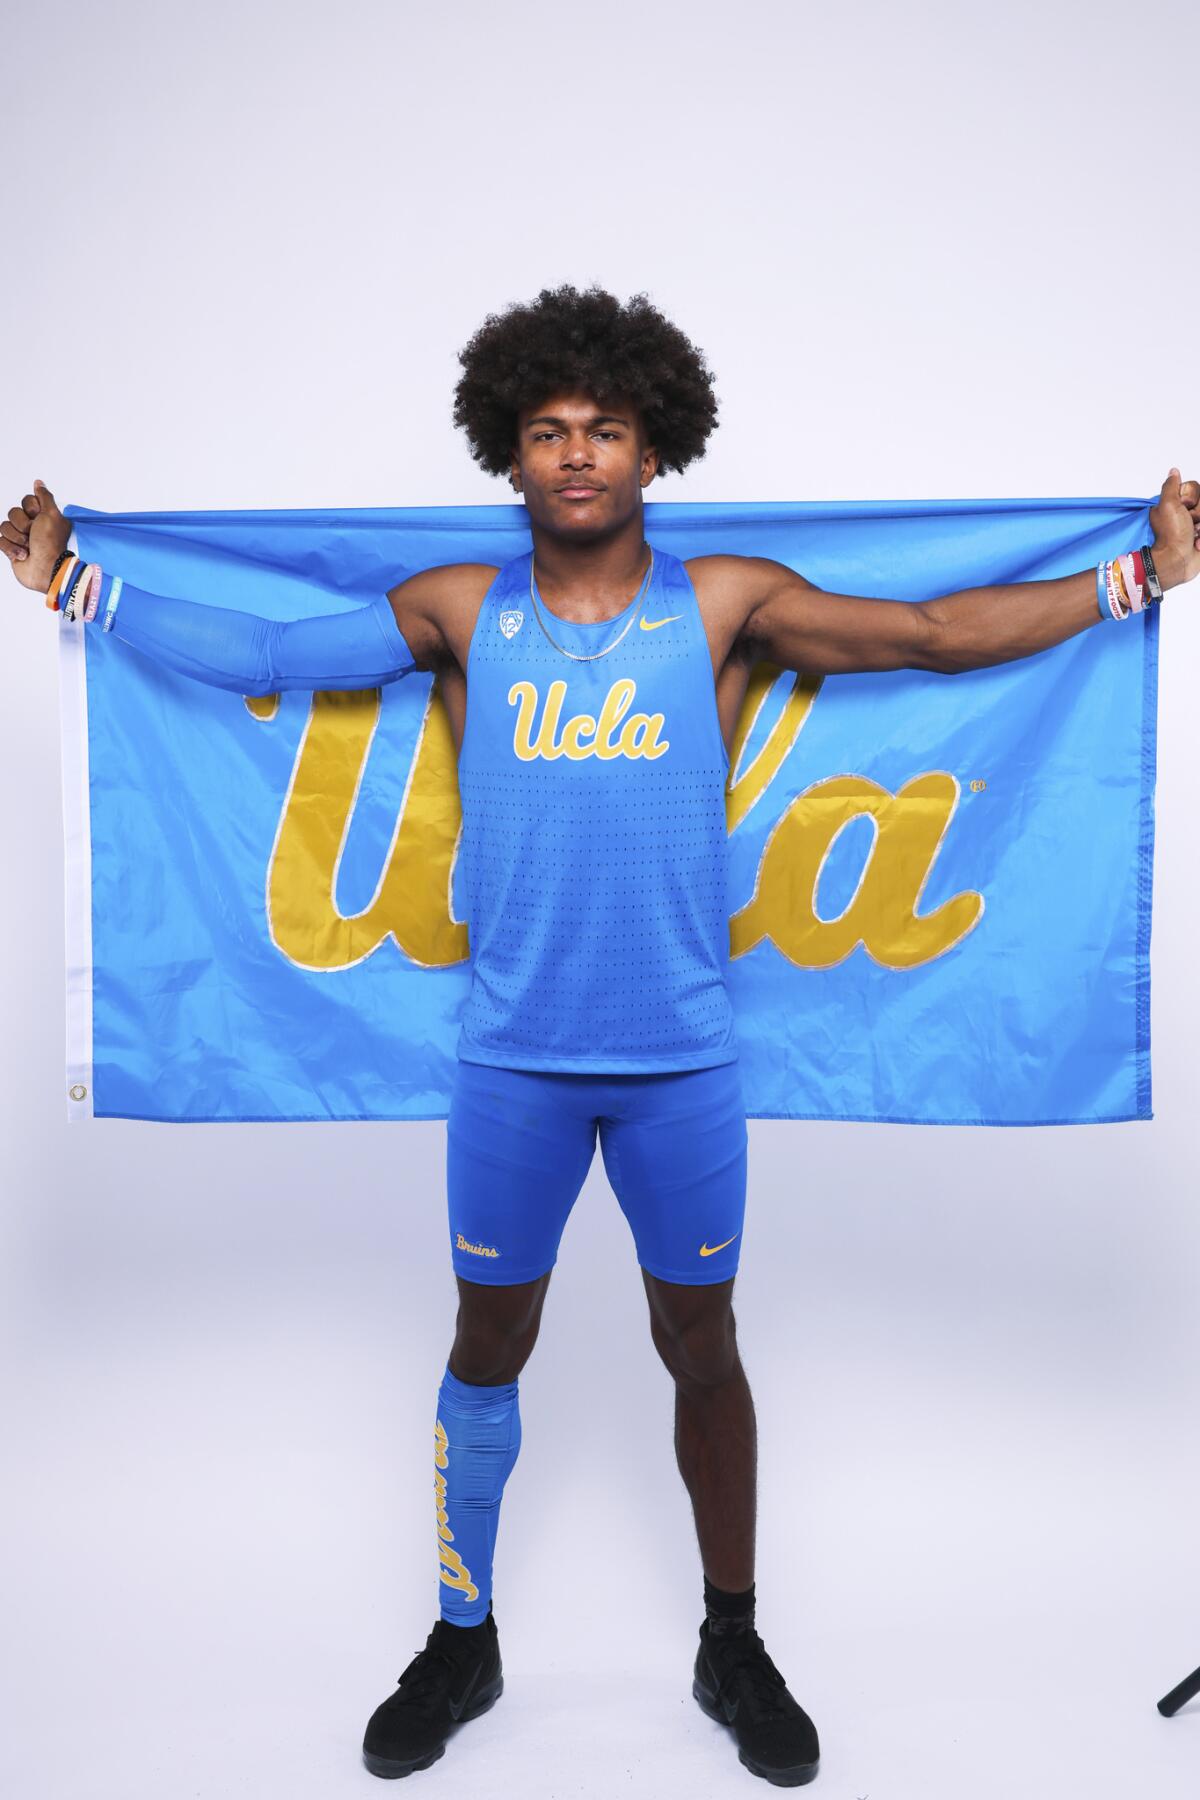 Karson Gordon is a hop, skip and jump away from UCLA playing days